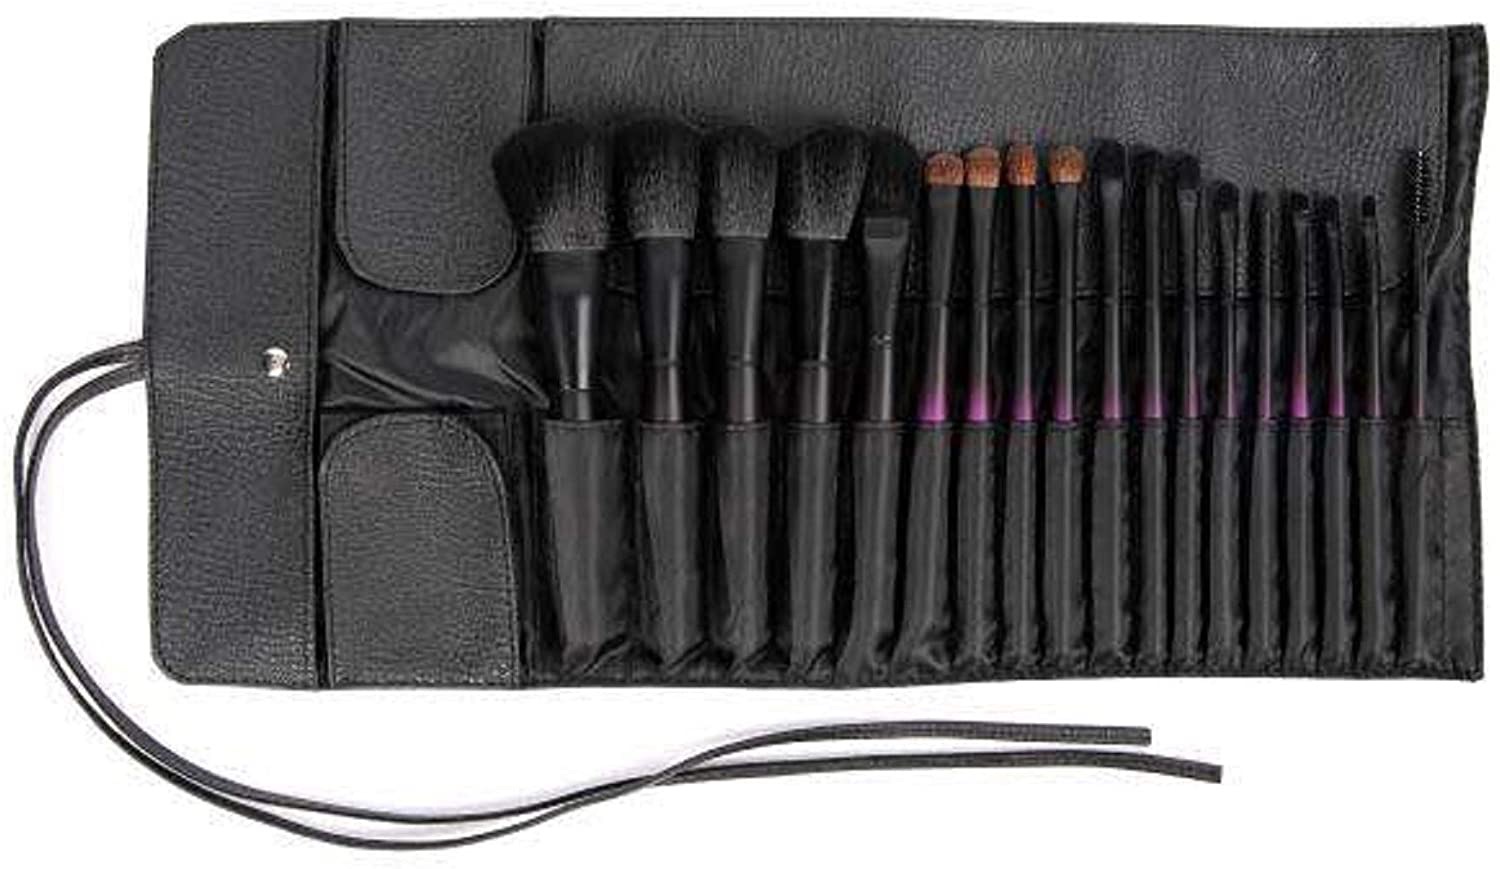 Amazon.com: Makeup Brushes, 18 Pack Premium Professional Makeup Brush Set with Leather Case for Eyeshadow Synthetic Foundation Powder Concealers Cosmetics Supplies: Beauty化妆刷